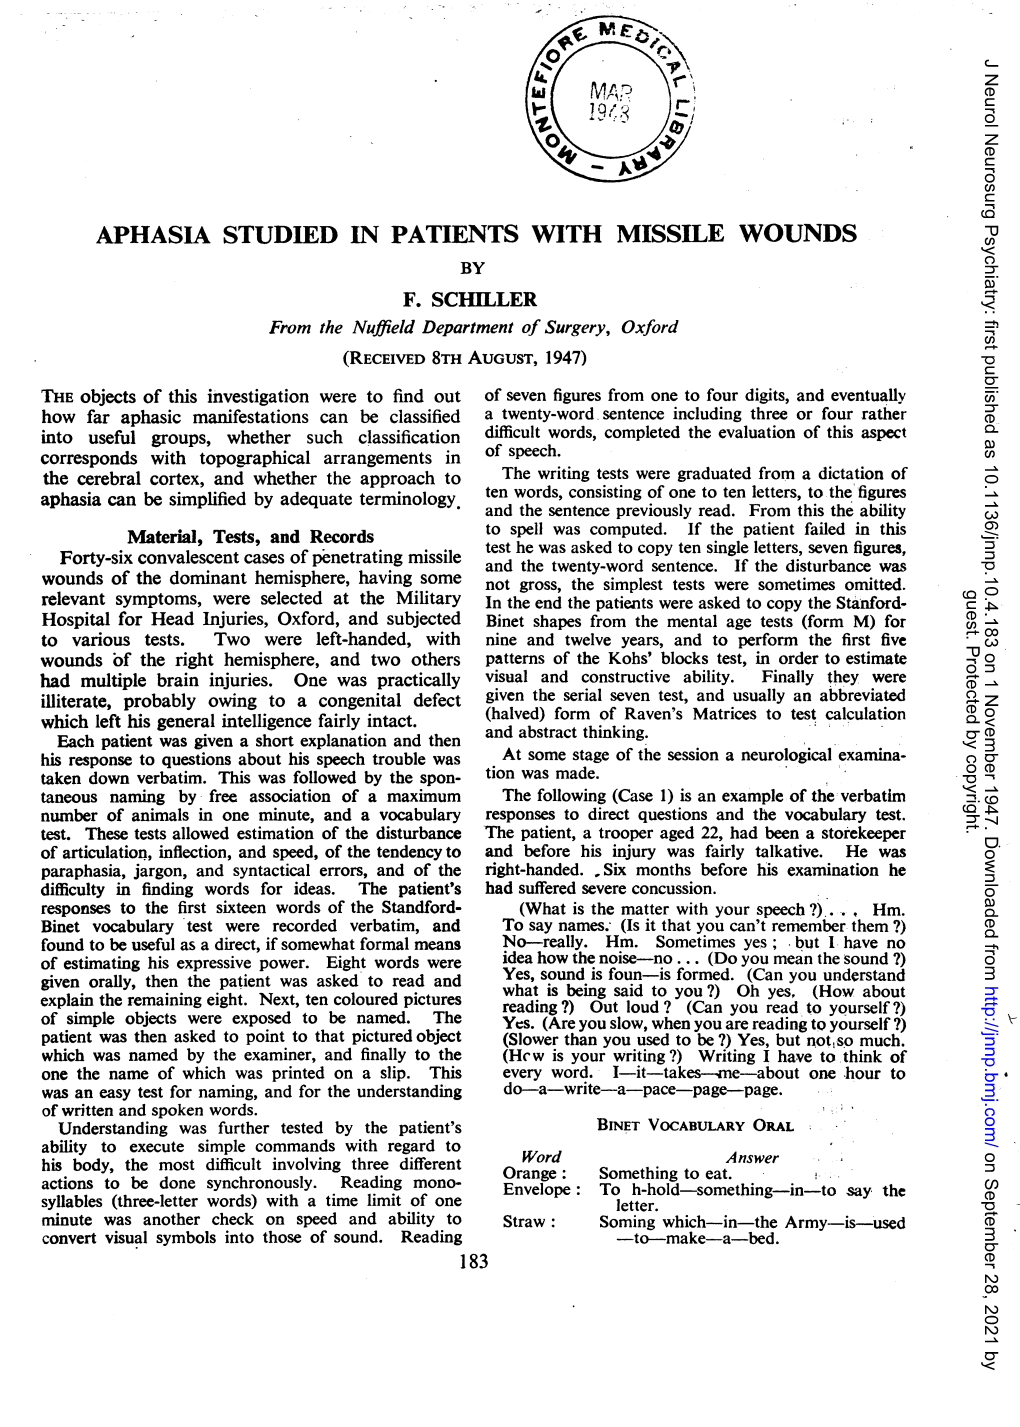 Aphasia Studied in Patients with Missile Wounds by F